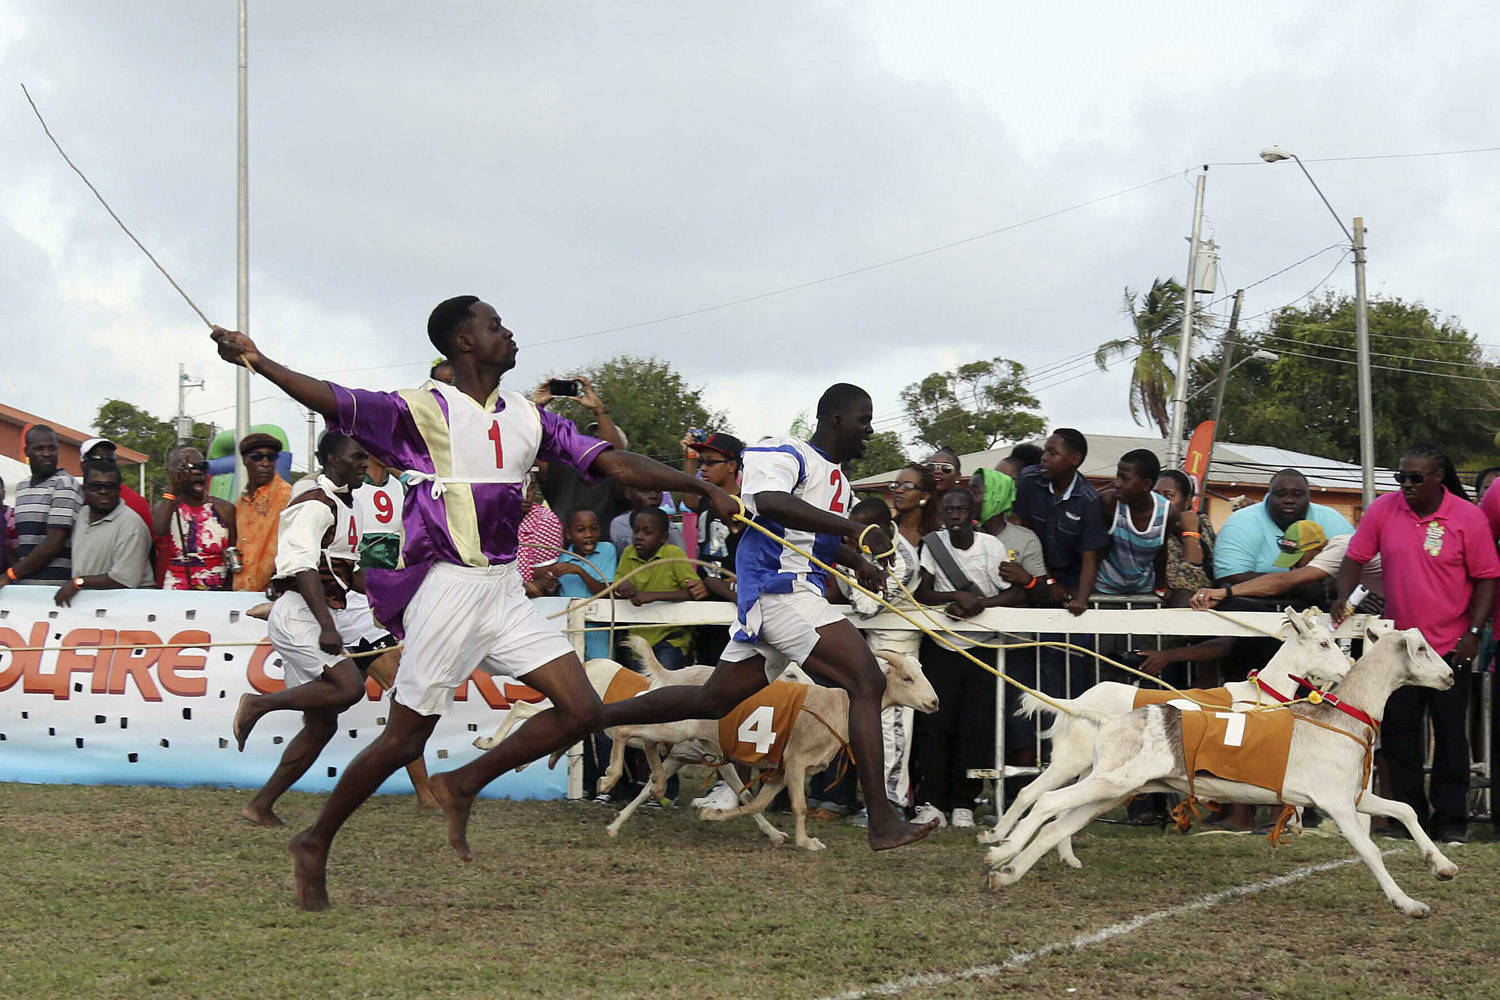 Jockey Samuel Cudjoe (1) runs his goat Bright Spark over the finish line to win the Class C2 Classic 100 metre race during the Carnbee/Mt Pleasant Community Council's 42nd annual sports meeting at the Mt Pleasant recreation ground, on Tobago island, April 21, 2014.